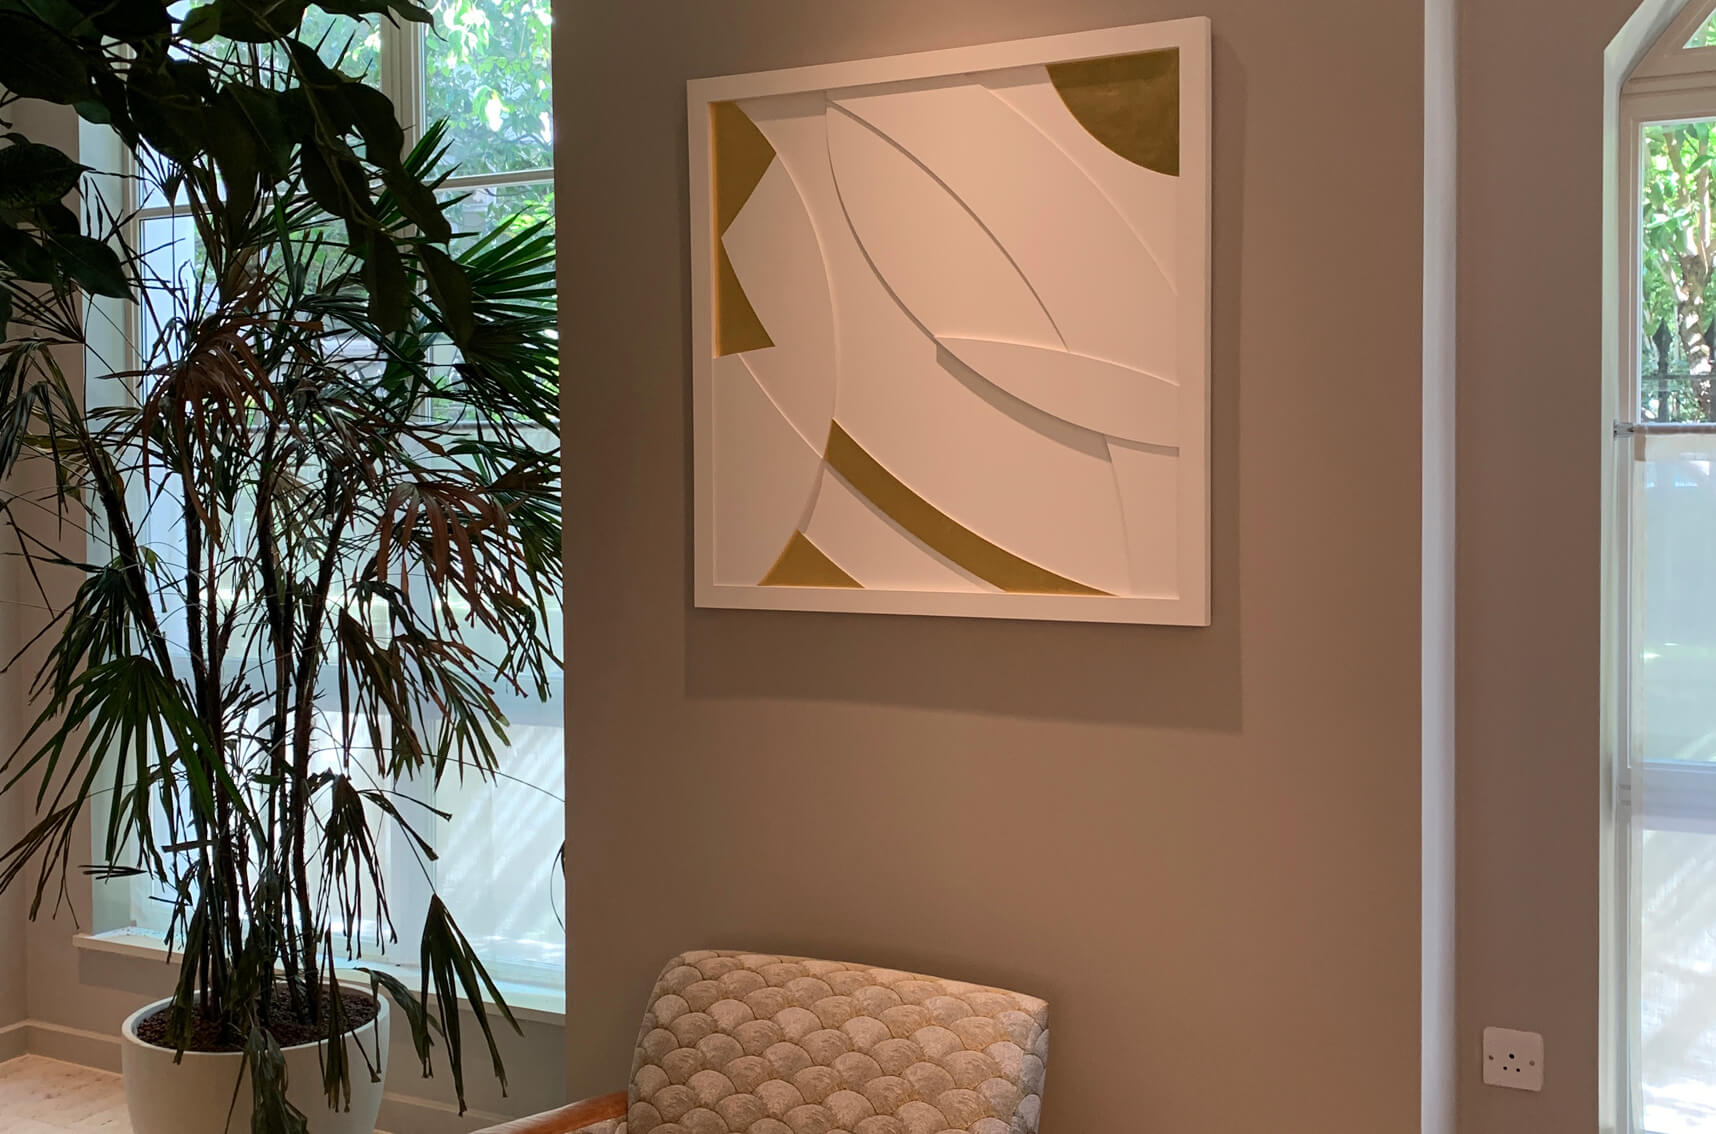 Cord Restaurant, London, graphic, bas relief, relief artwork, abstract relief, abstract art, 3d artwork, 3d, white, gold, gold leaf, mixed media, geometric, bespoke, commissioned artwork, artwork for restaurants